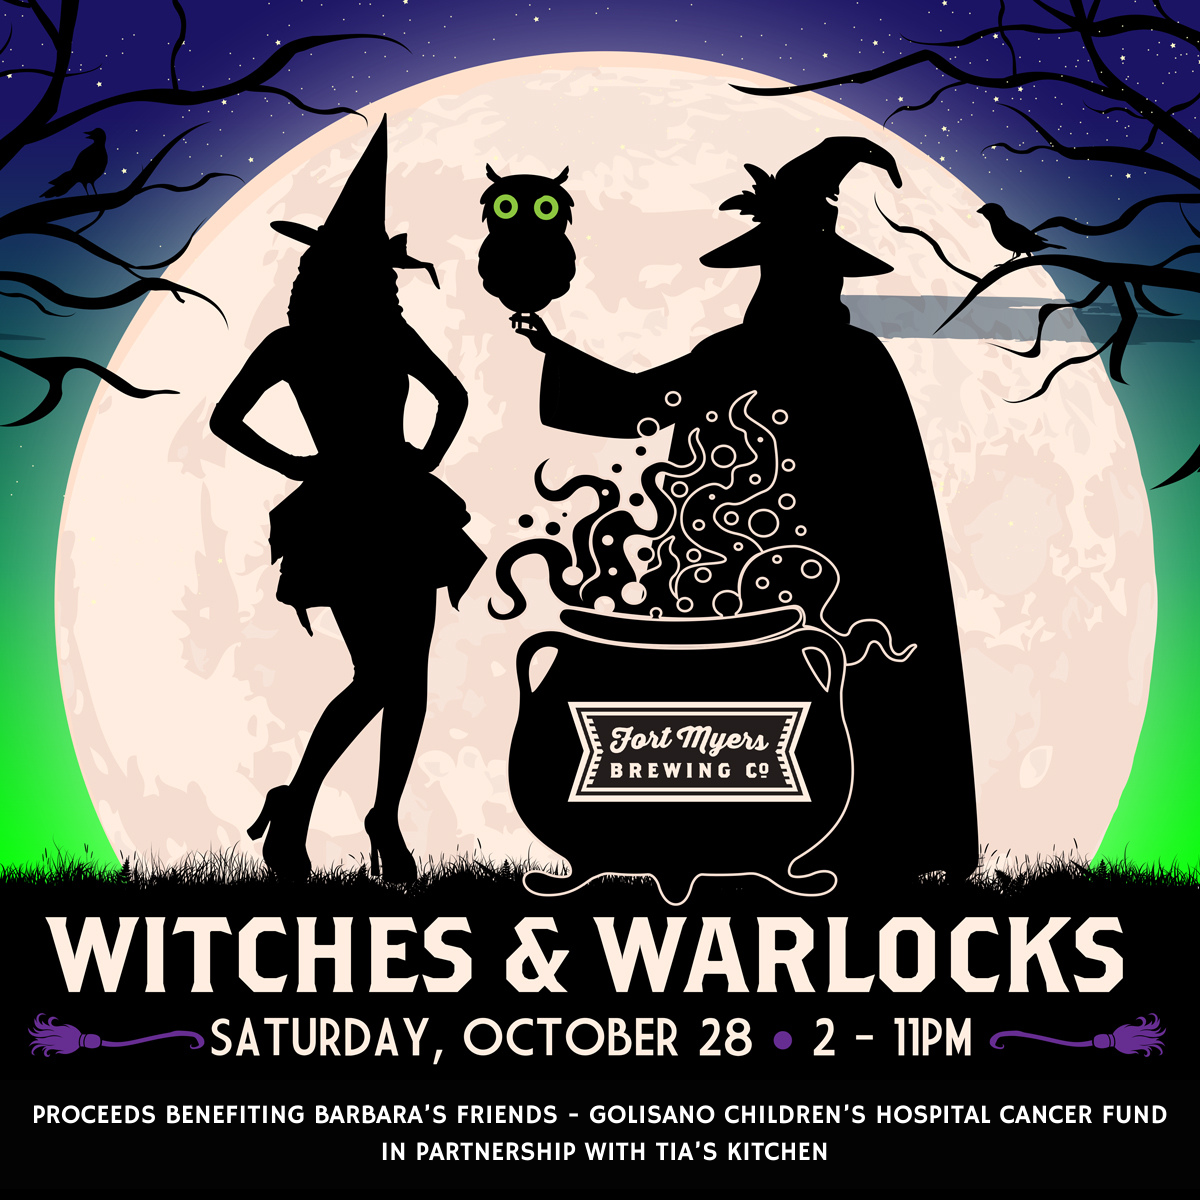 witches and warlocks event flyer happening at Fort Myers Brewing Company on October 28 at 2pm.